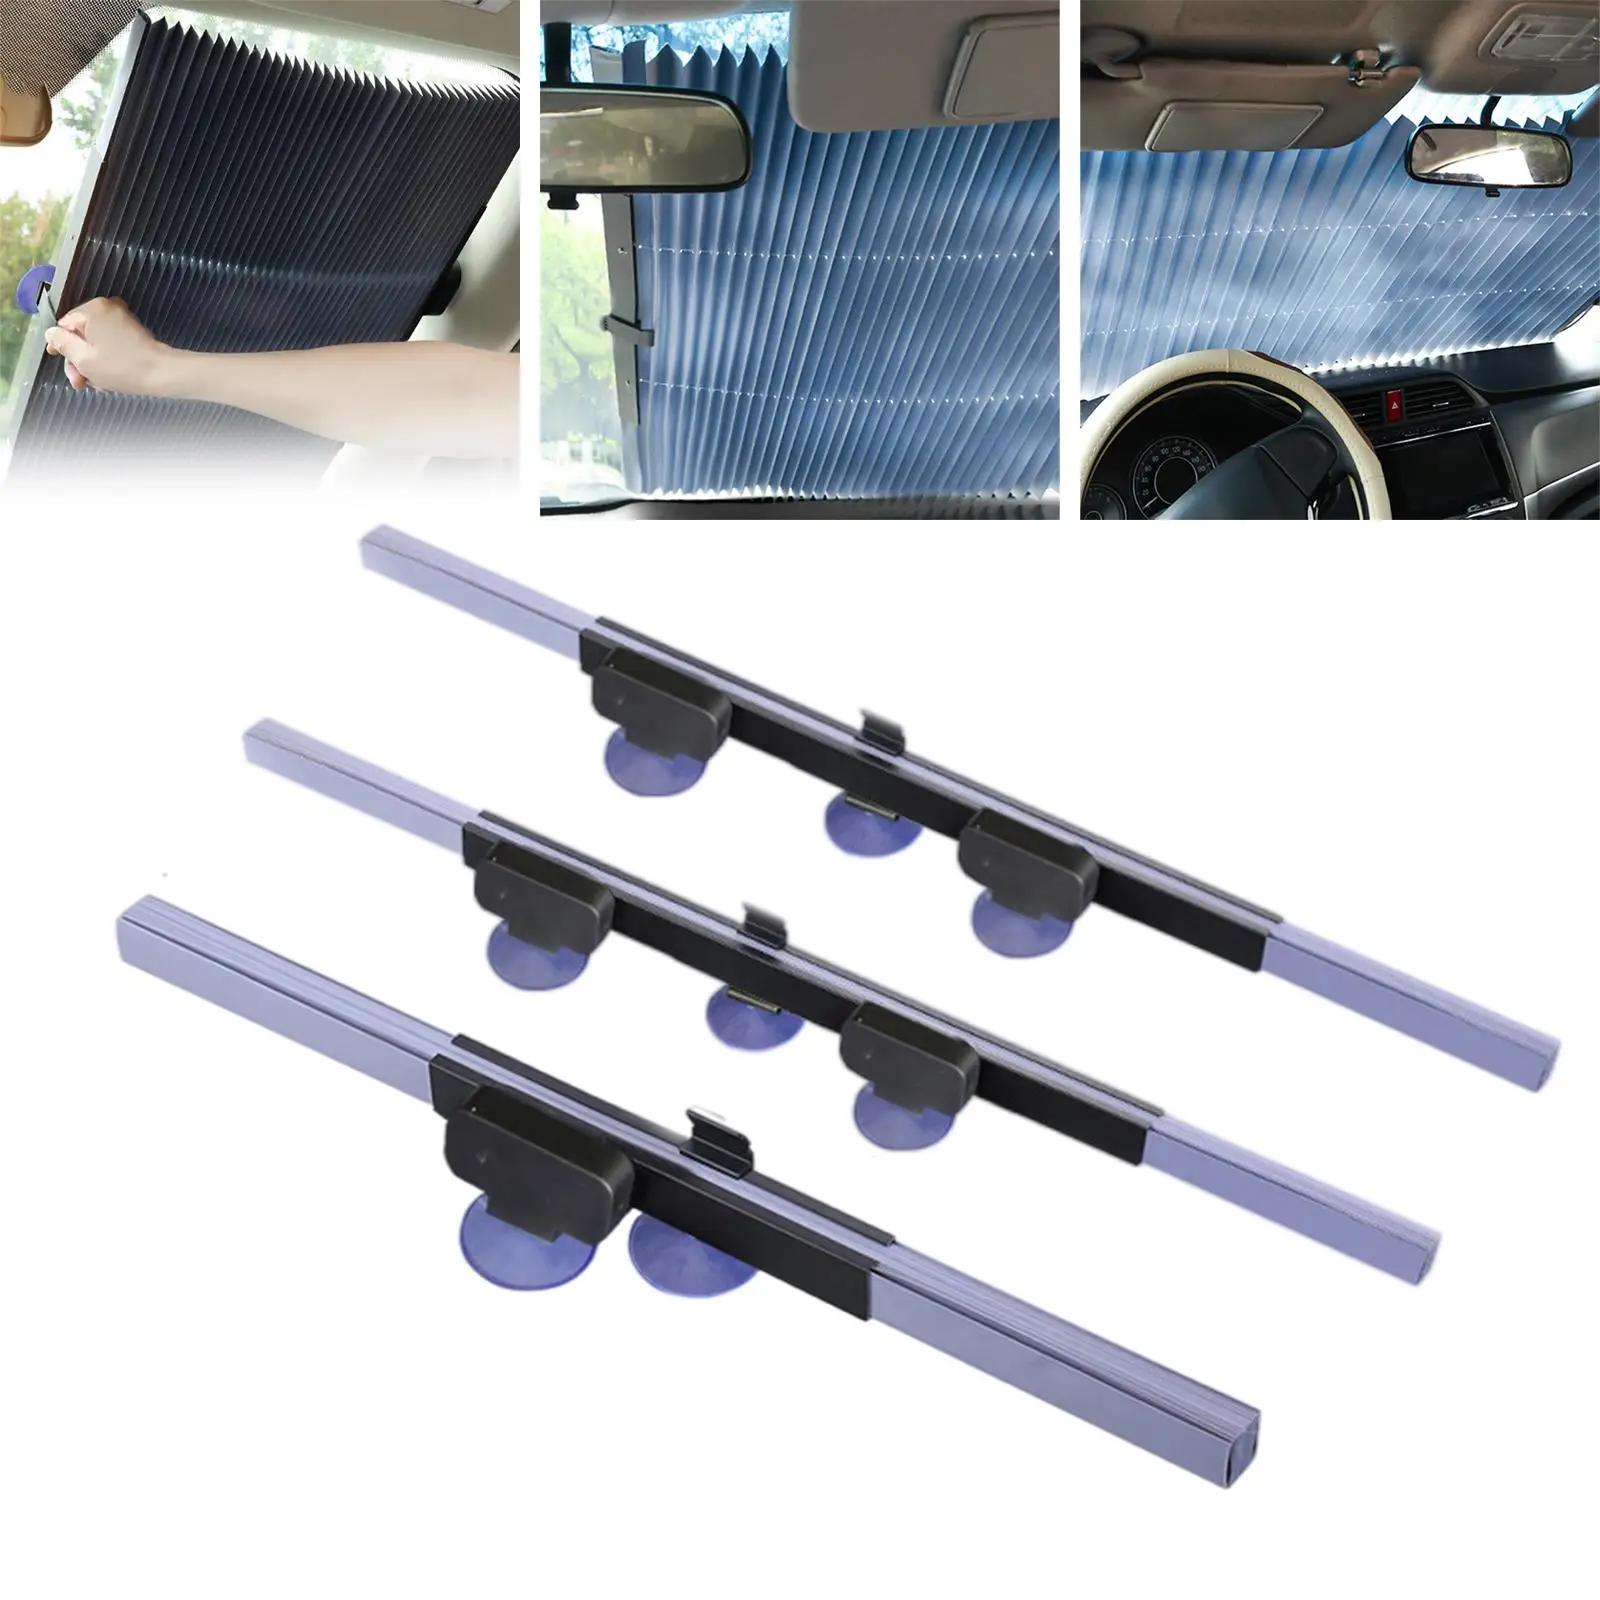 Windshield Sun Shade Durable Suction Power Adjustable UV Protect with Suction Cups Sun Visor Sunshade Curtains for All Cars